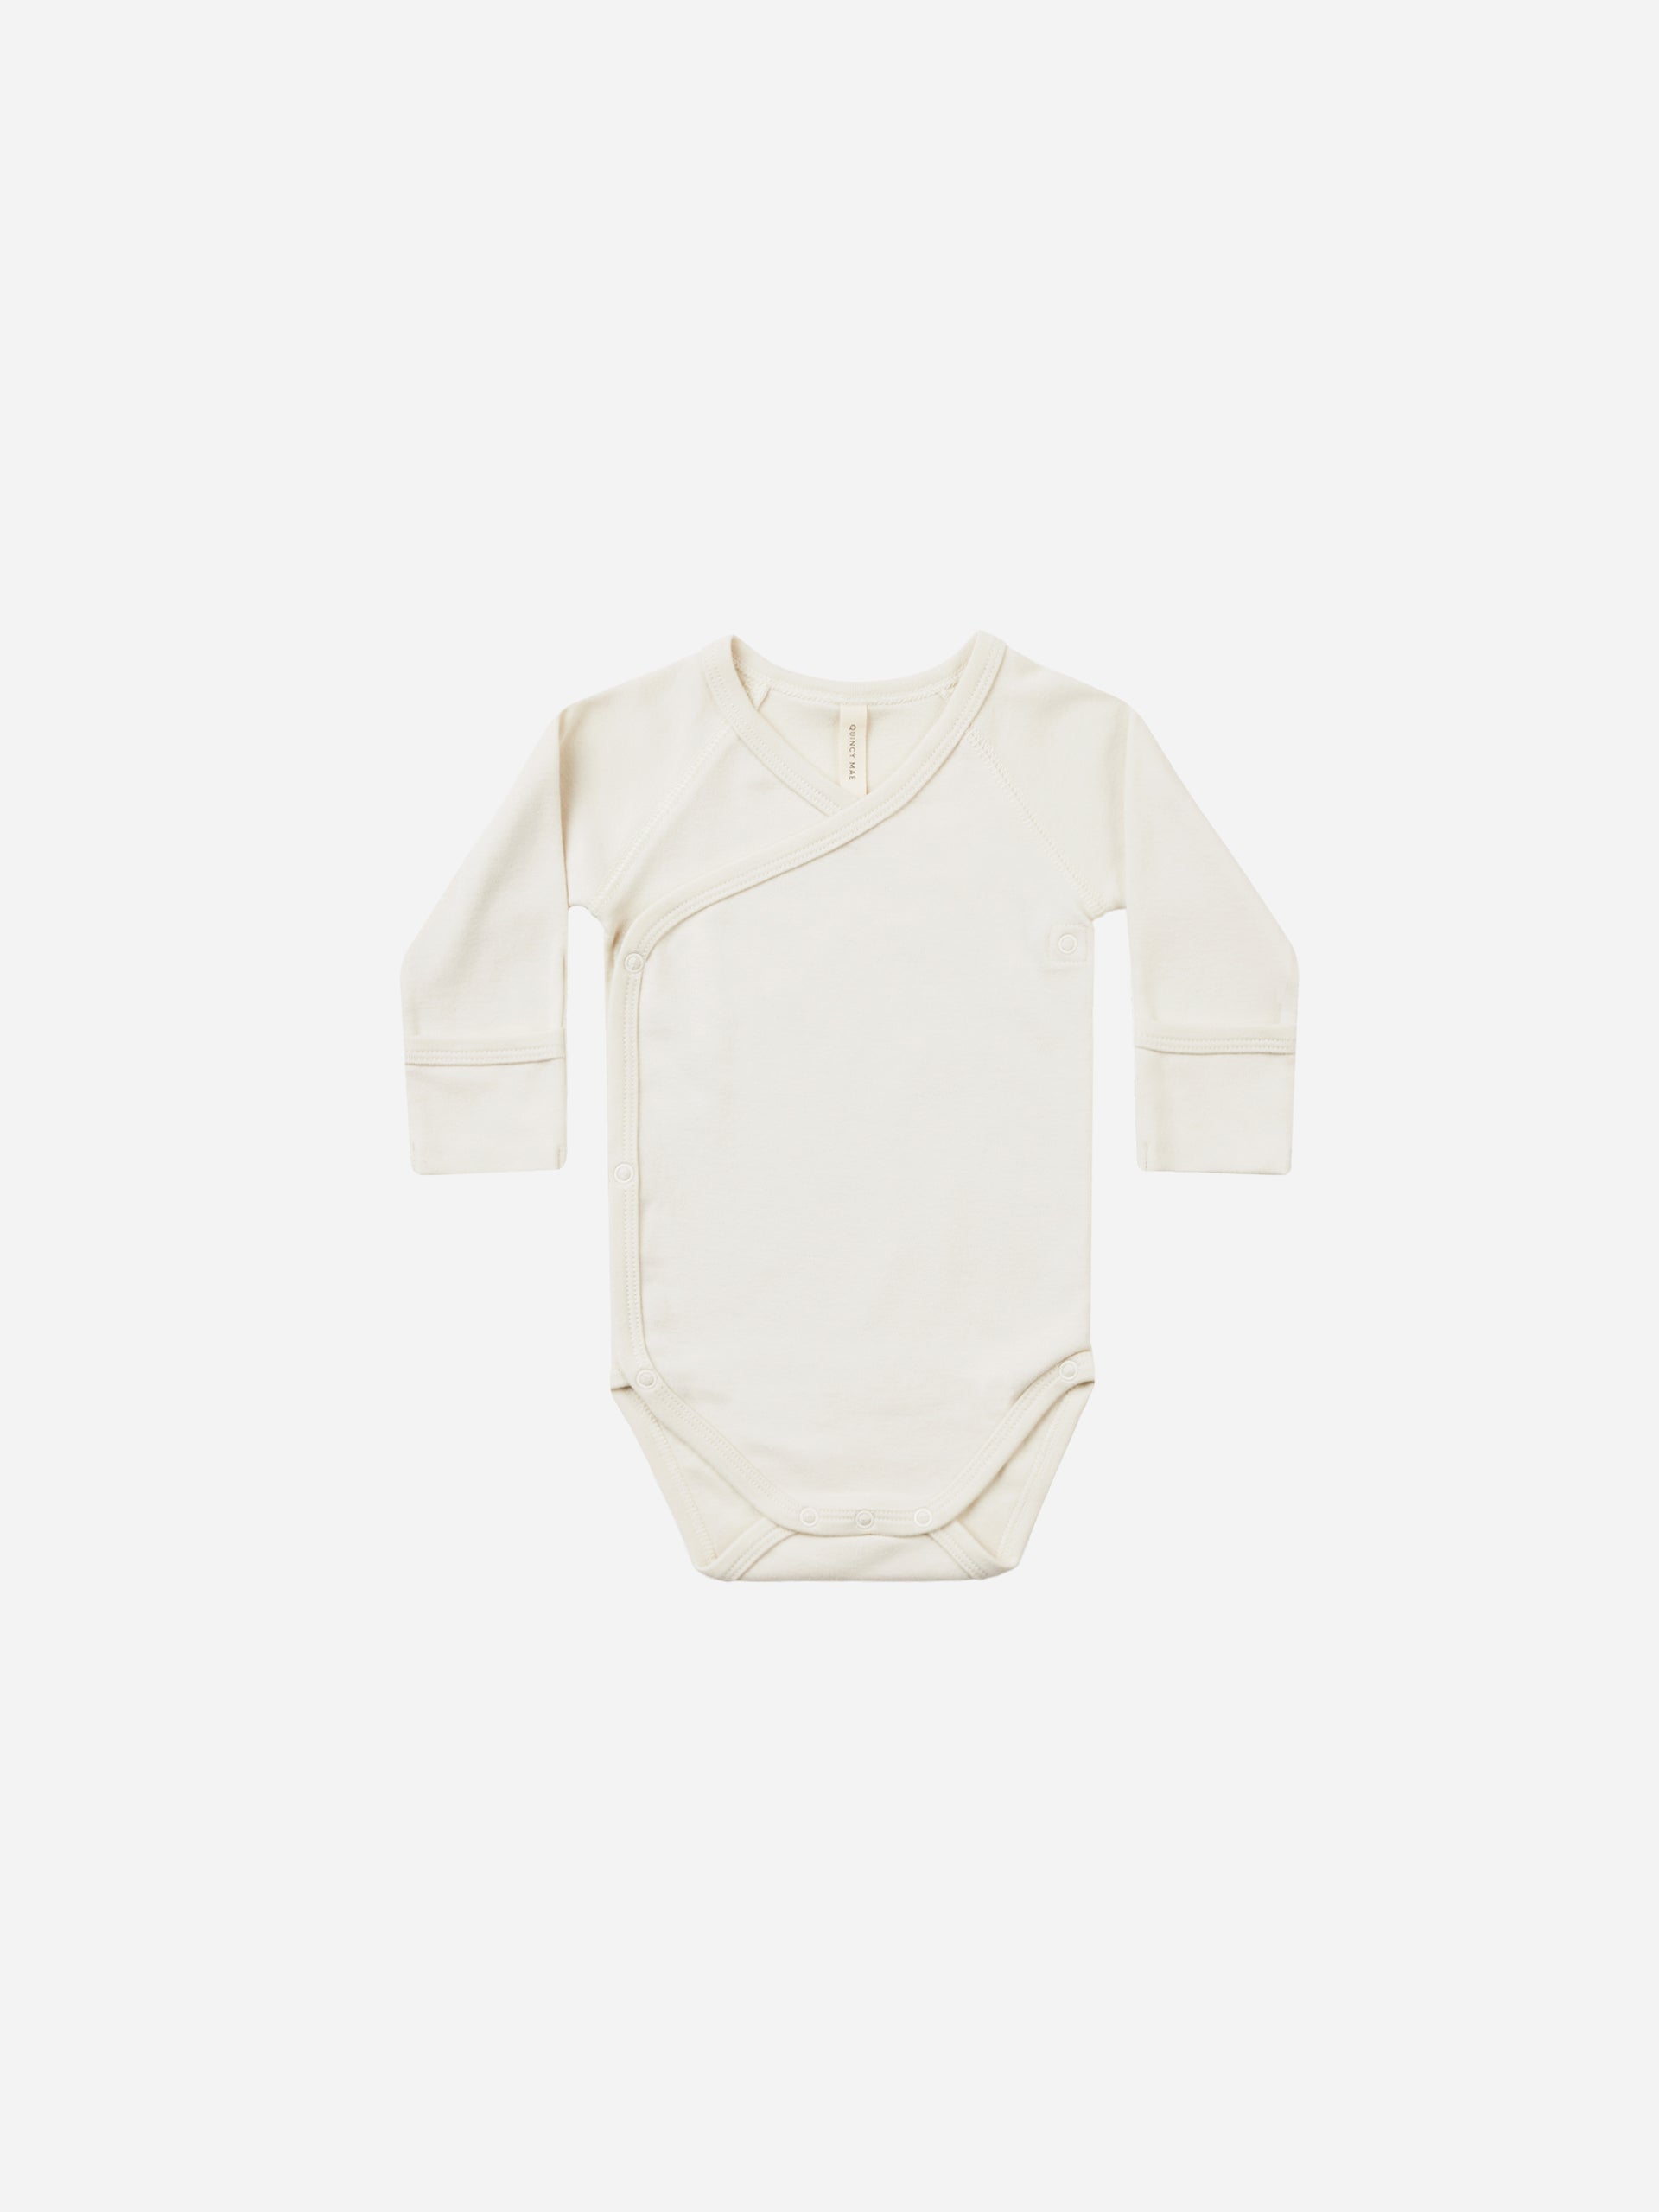 Side Snap Bodysuit || Ivory - Rylee + Cru | Kids Clothes | Trendy Baby Clothes | Modern Infant Outfits |